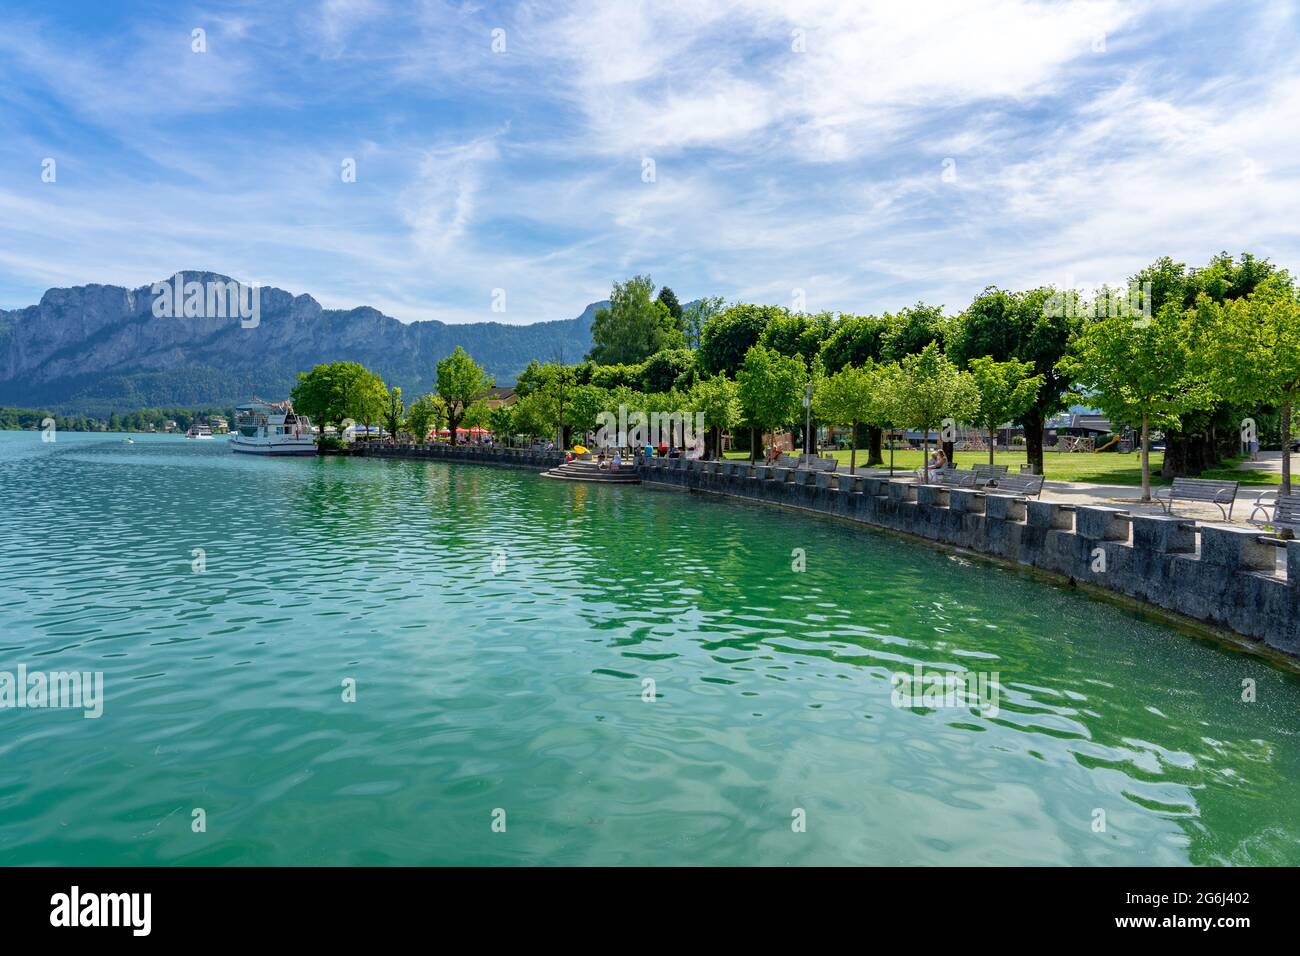 06.05.2021 - Mondsee, Austria: Mondsee with mountains and the beautiful promenade with people and ships Stock Photo